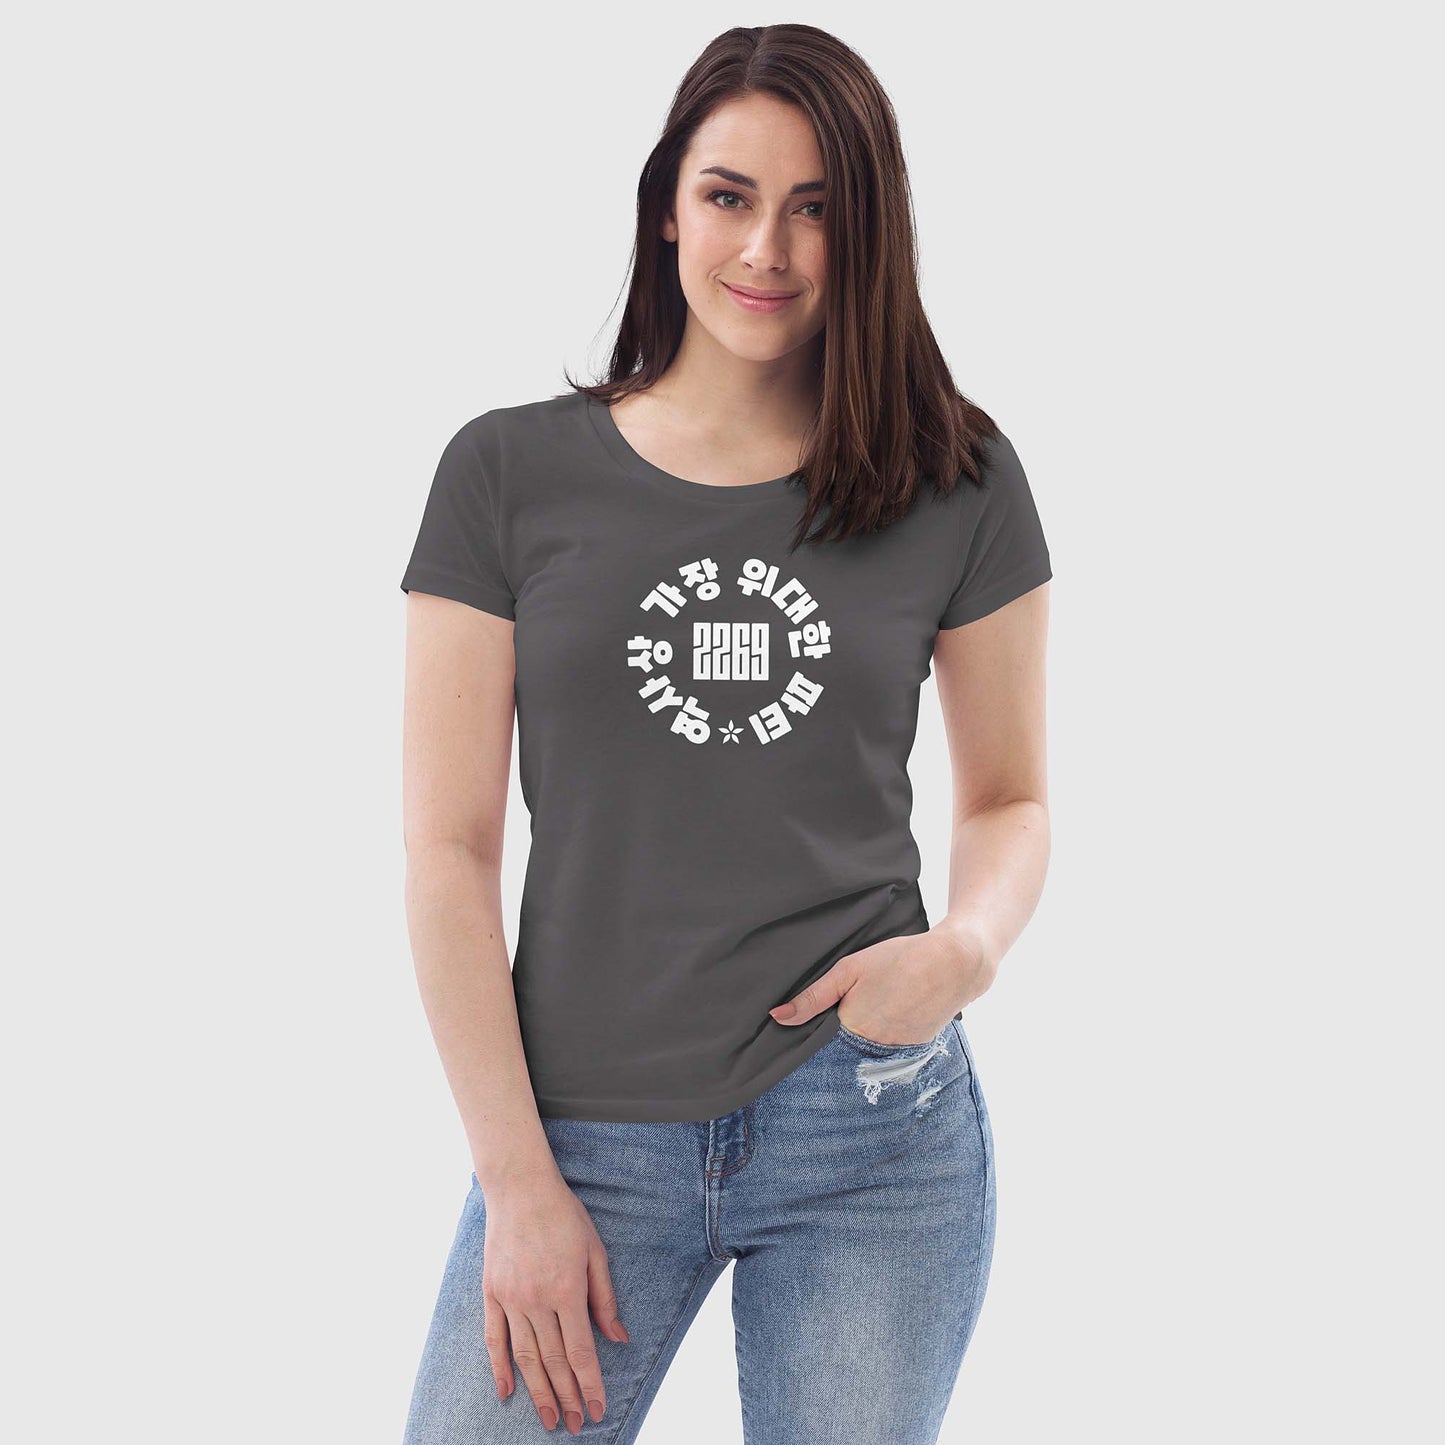 Women's anthracite fitted organic cotton t-shirt with Korean 2269 party circle